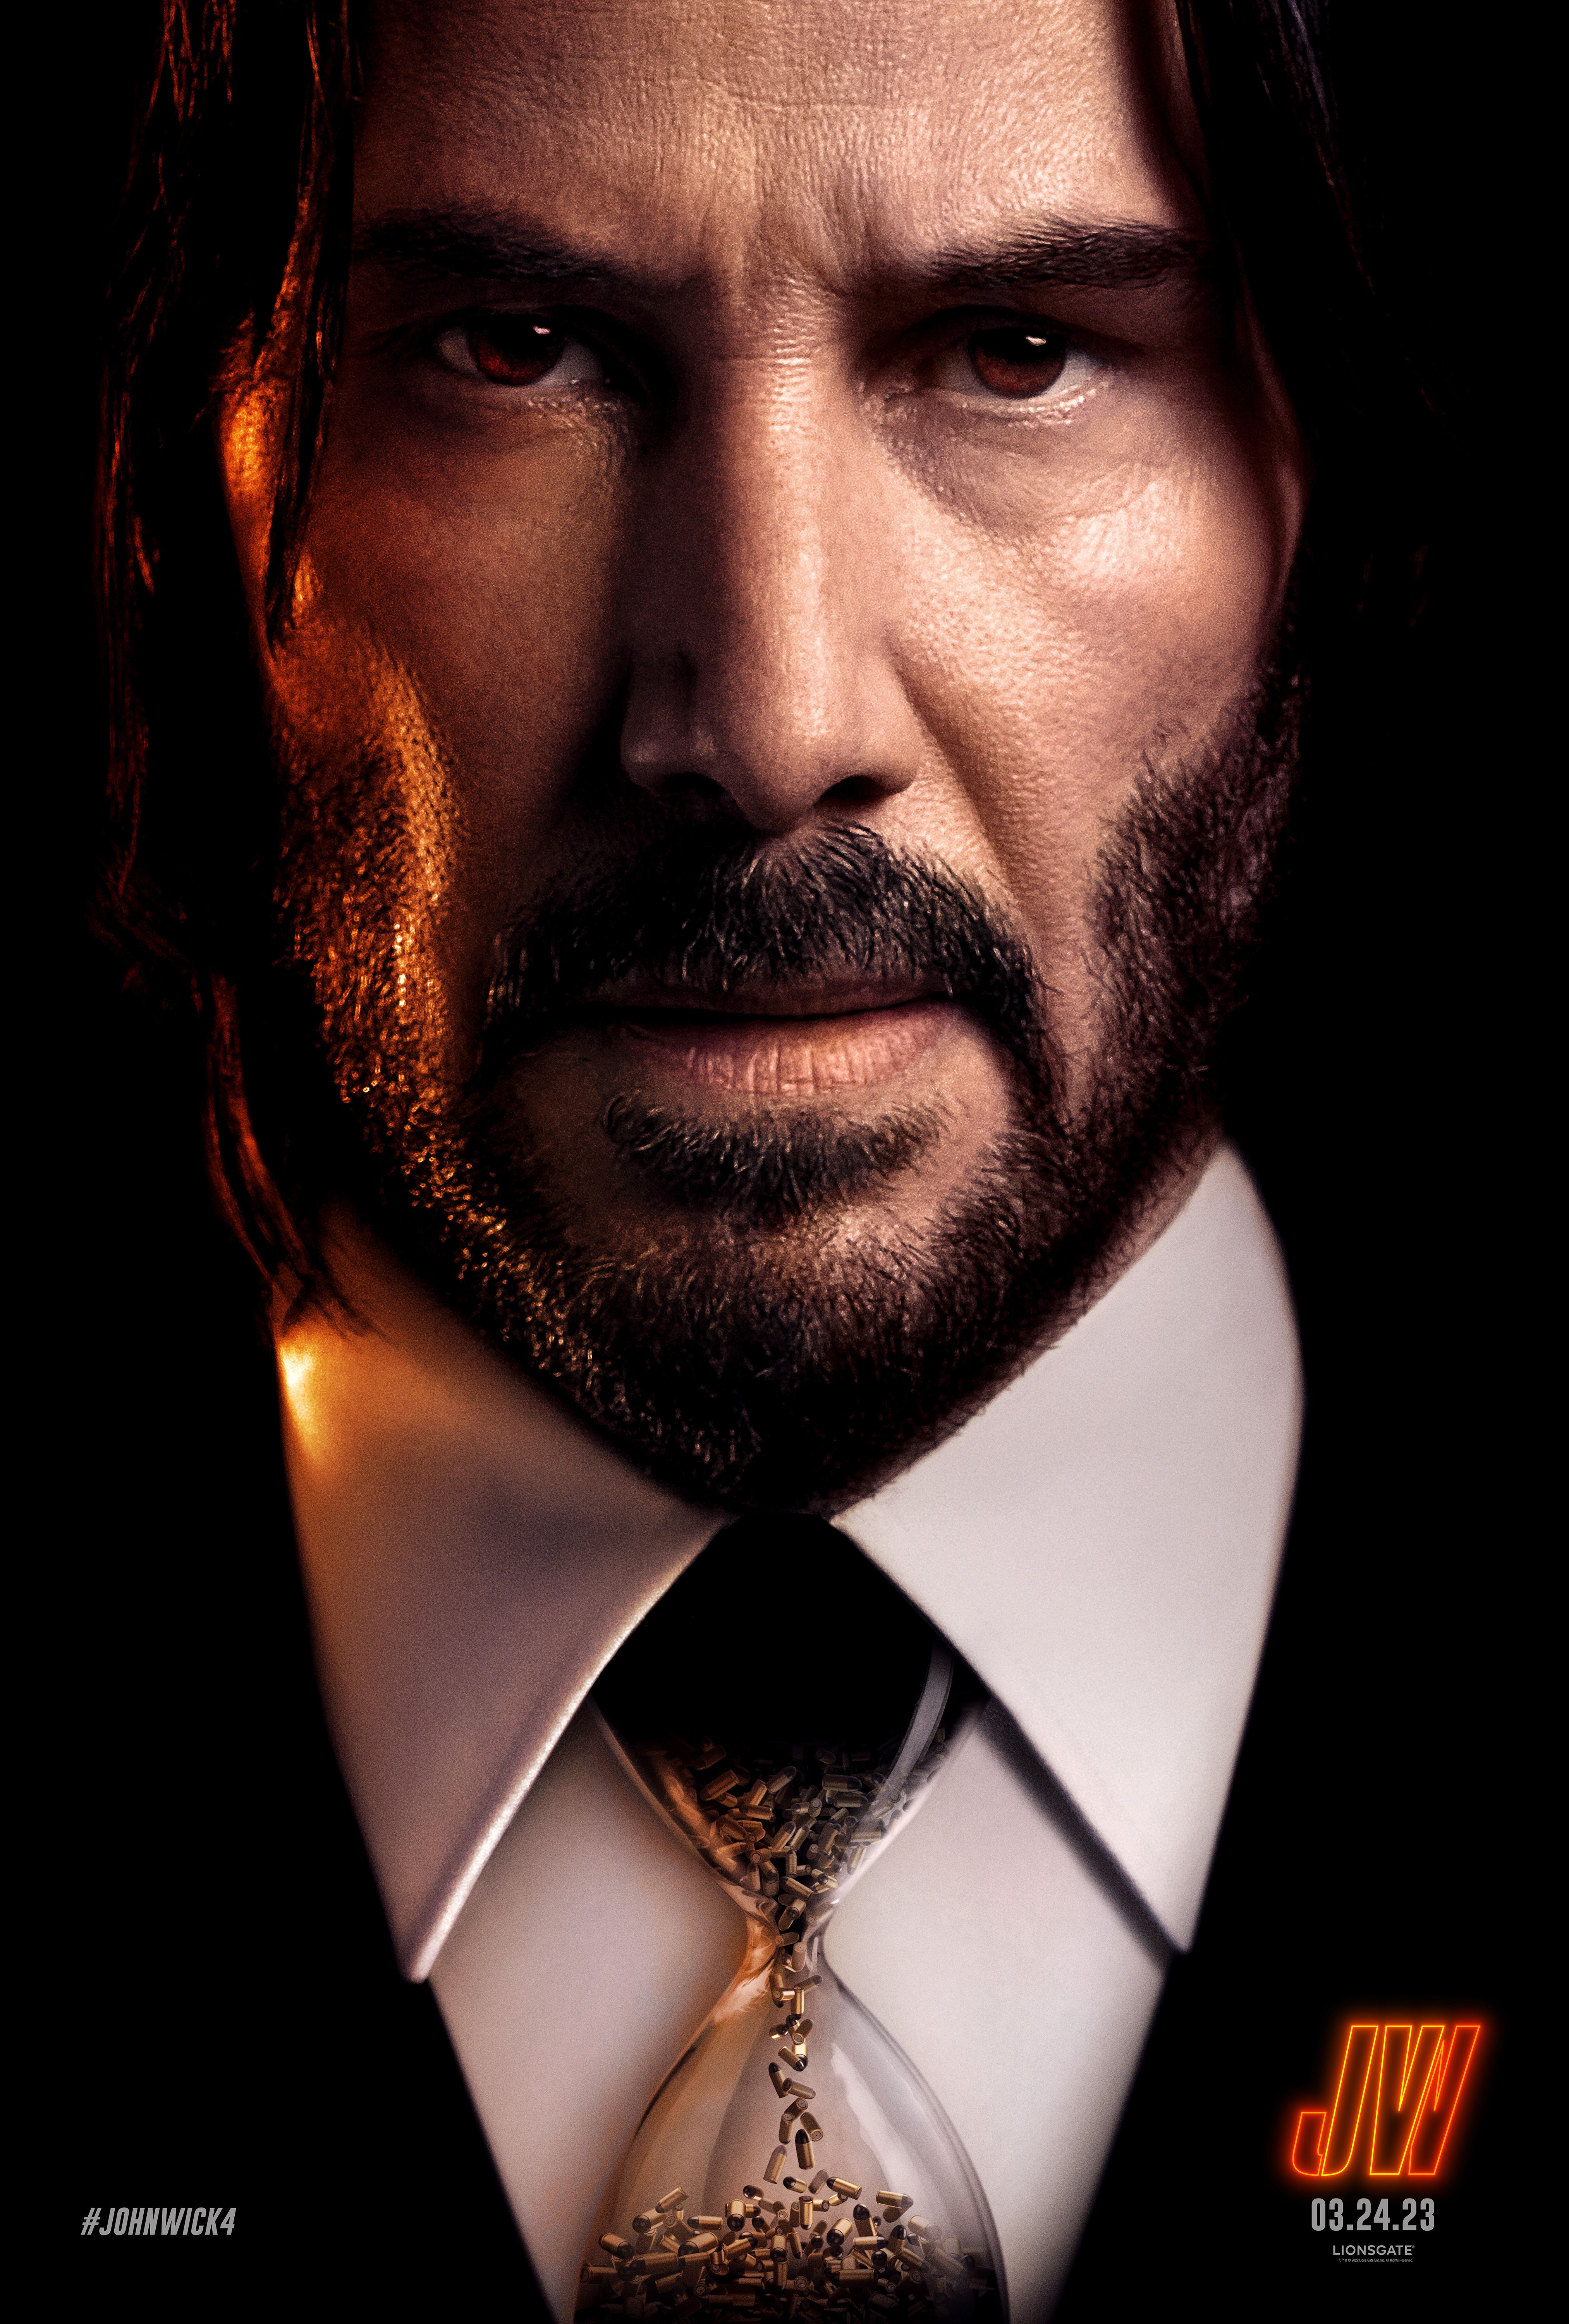 Keanu Reeves Begged 'John Wick 4' Team to Kill Him Off Definitively